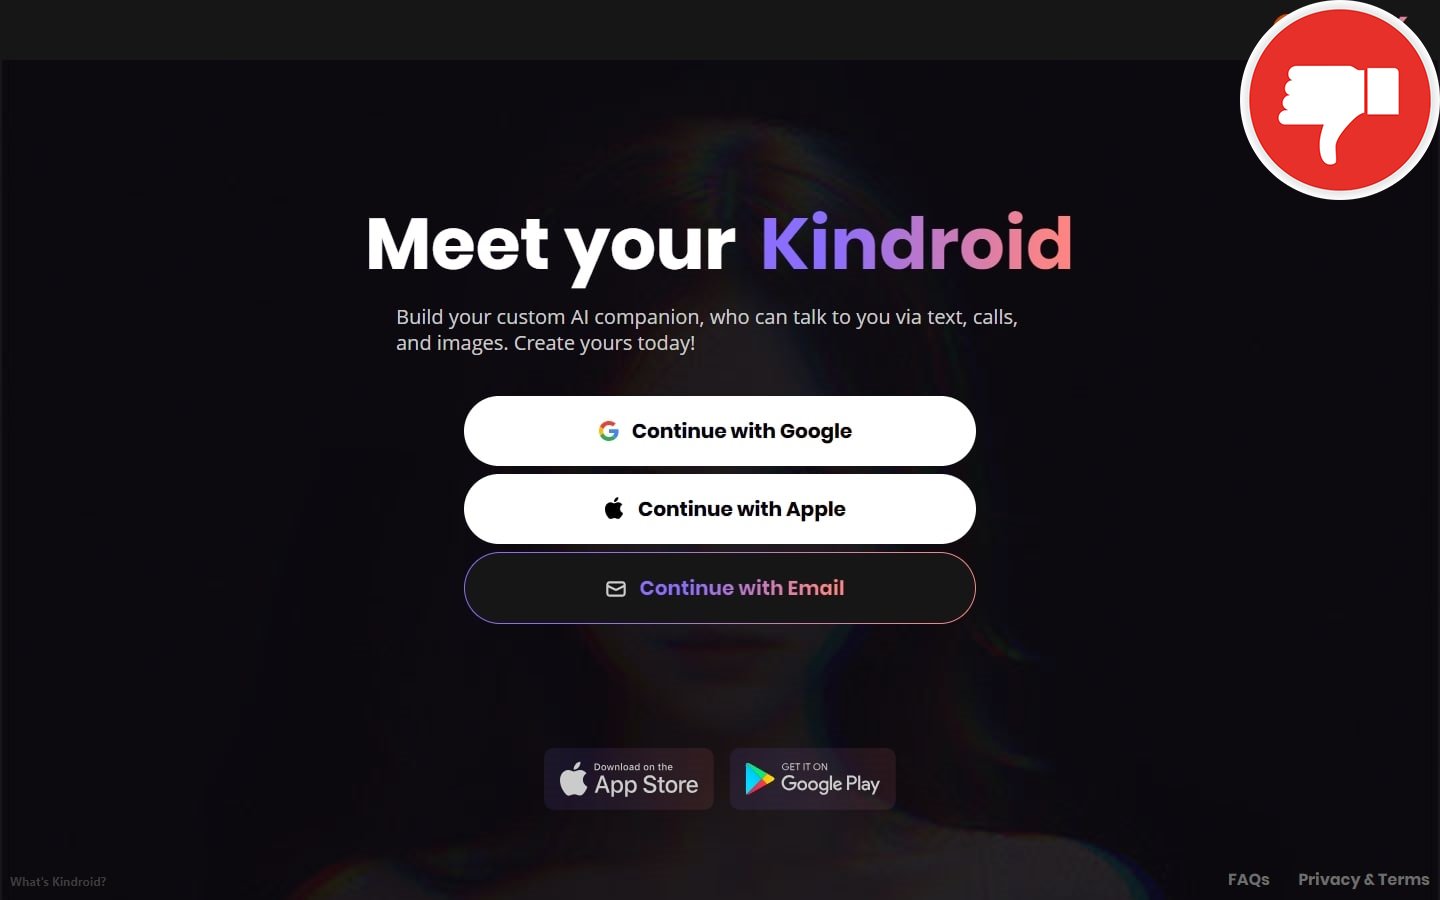 Review Kindroid.ai scam experience